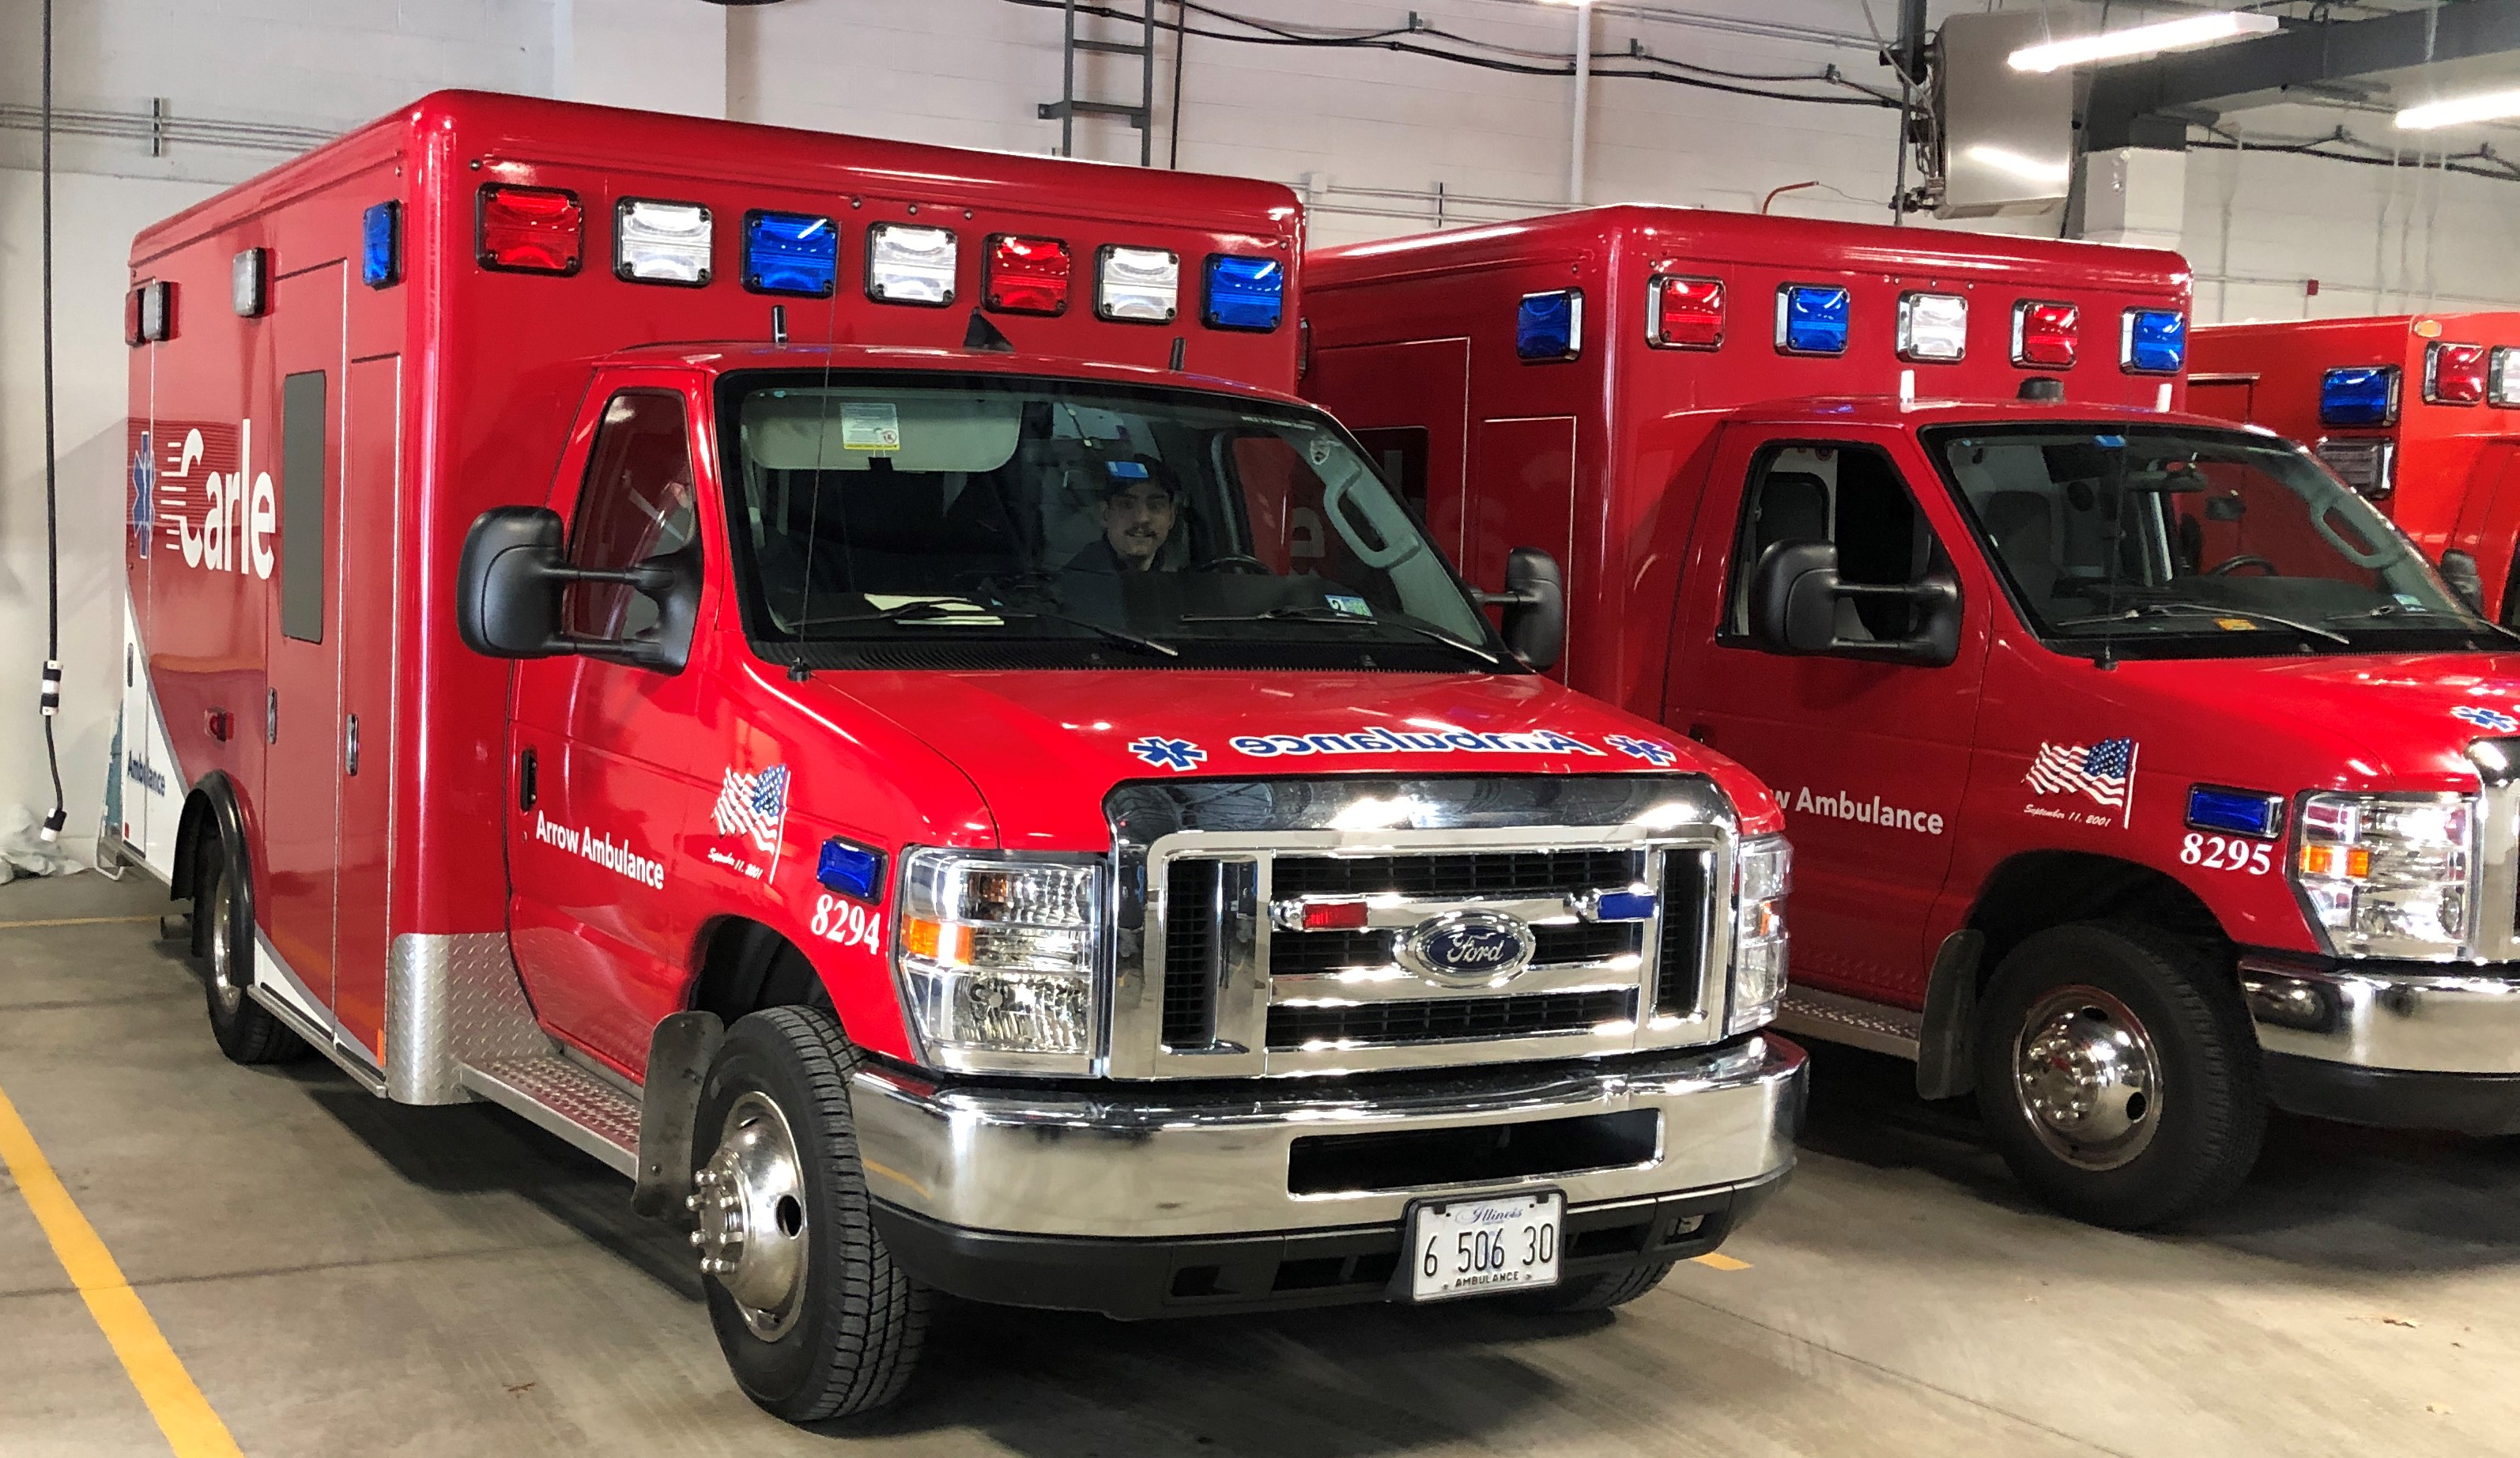 Arrow Ambulance’s dedicated team works to meet the needs of every community they serve